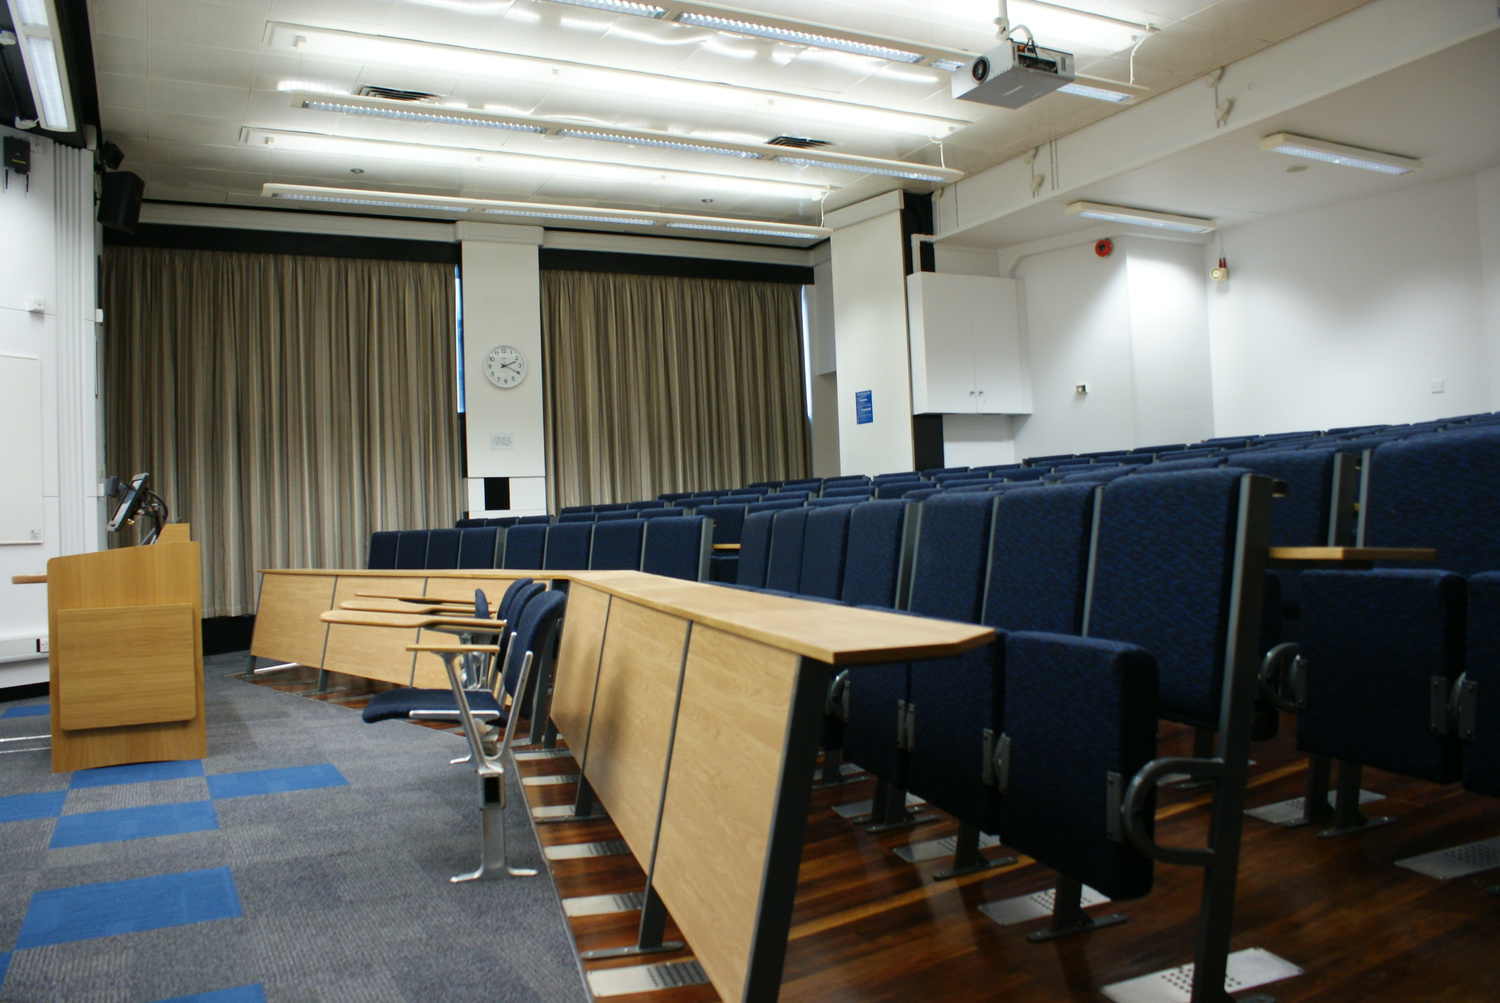  Agilent Lecture Theatre, Electrical Engineering - CTS 2013 